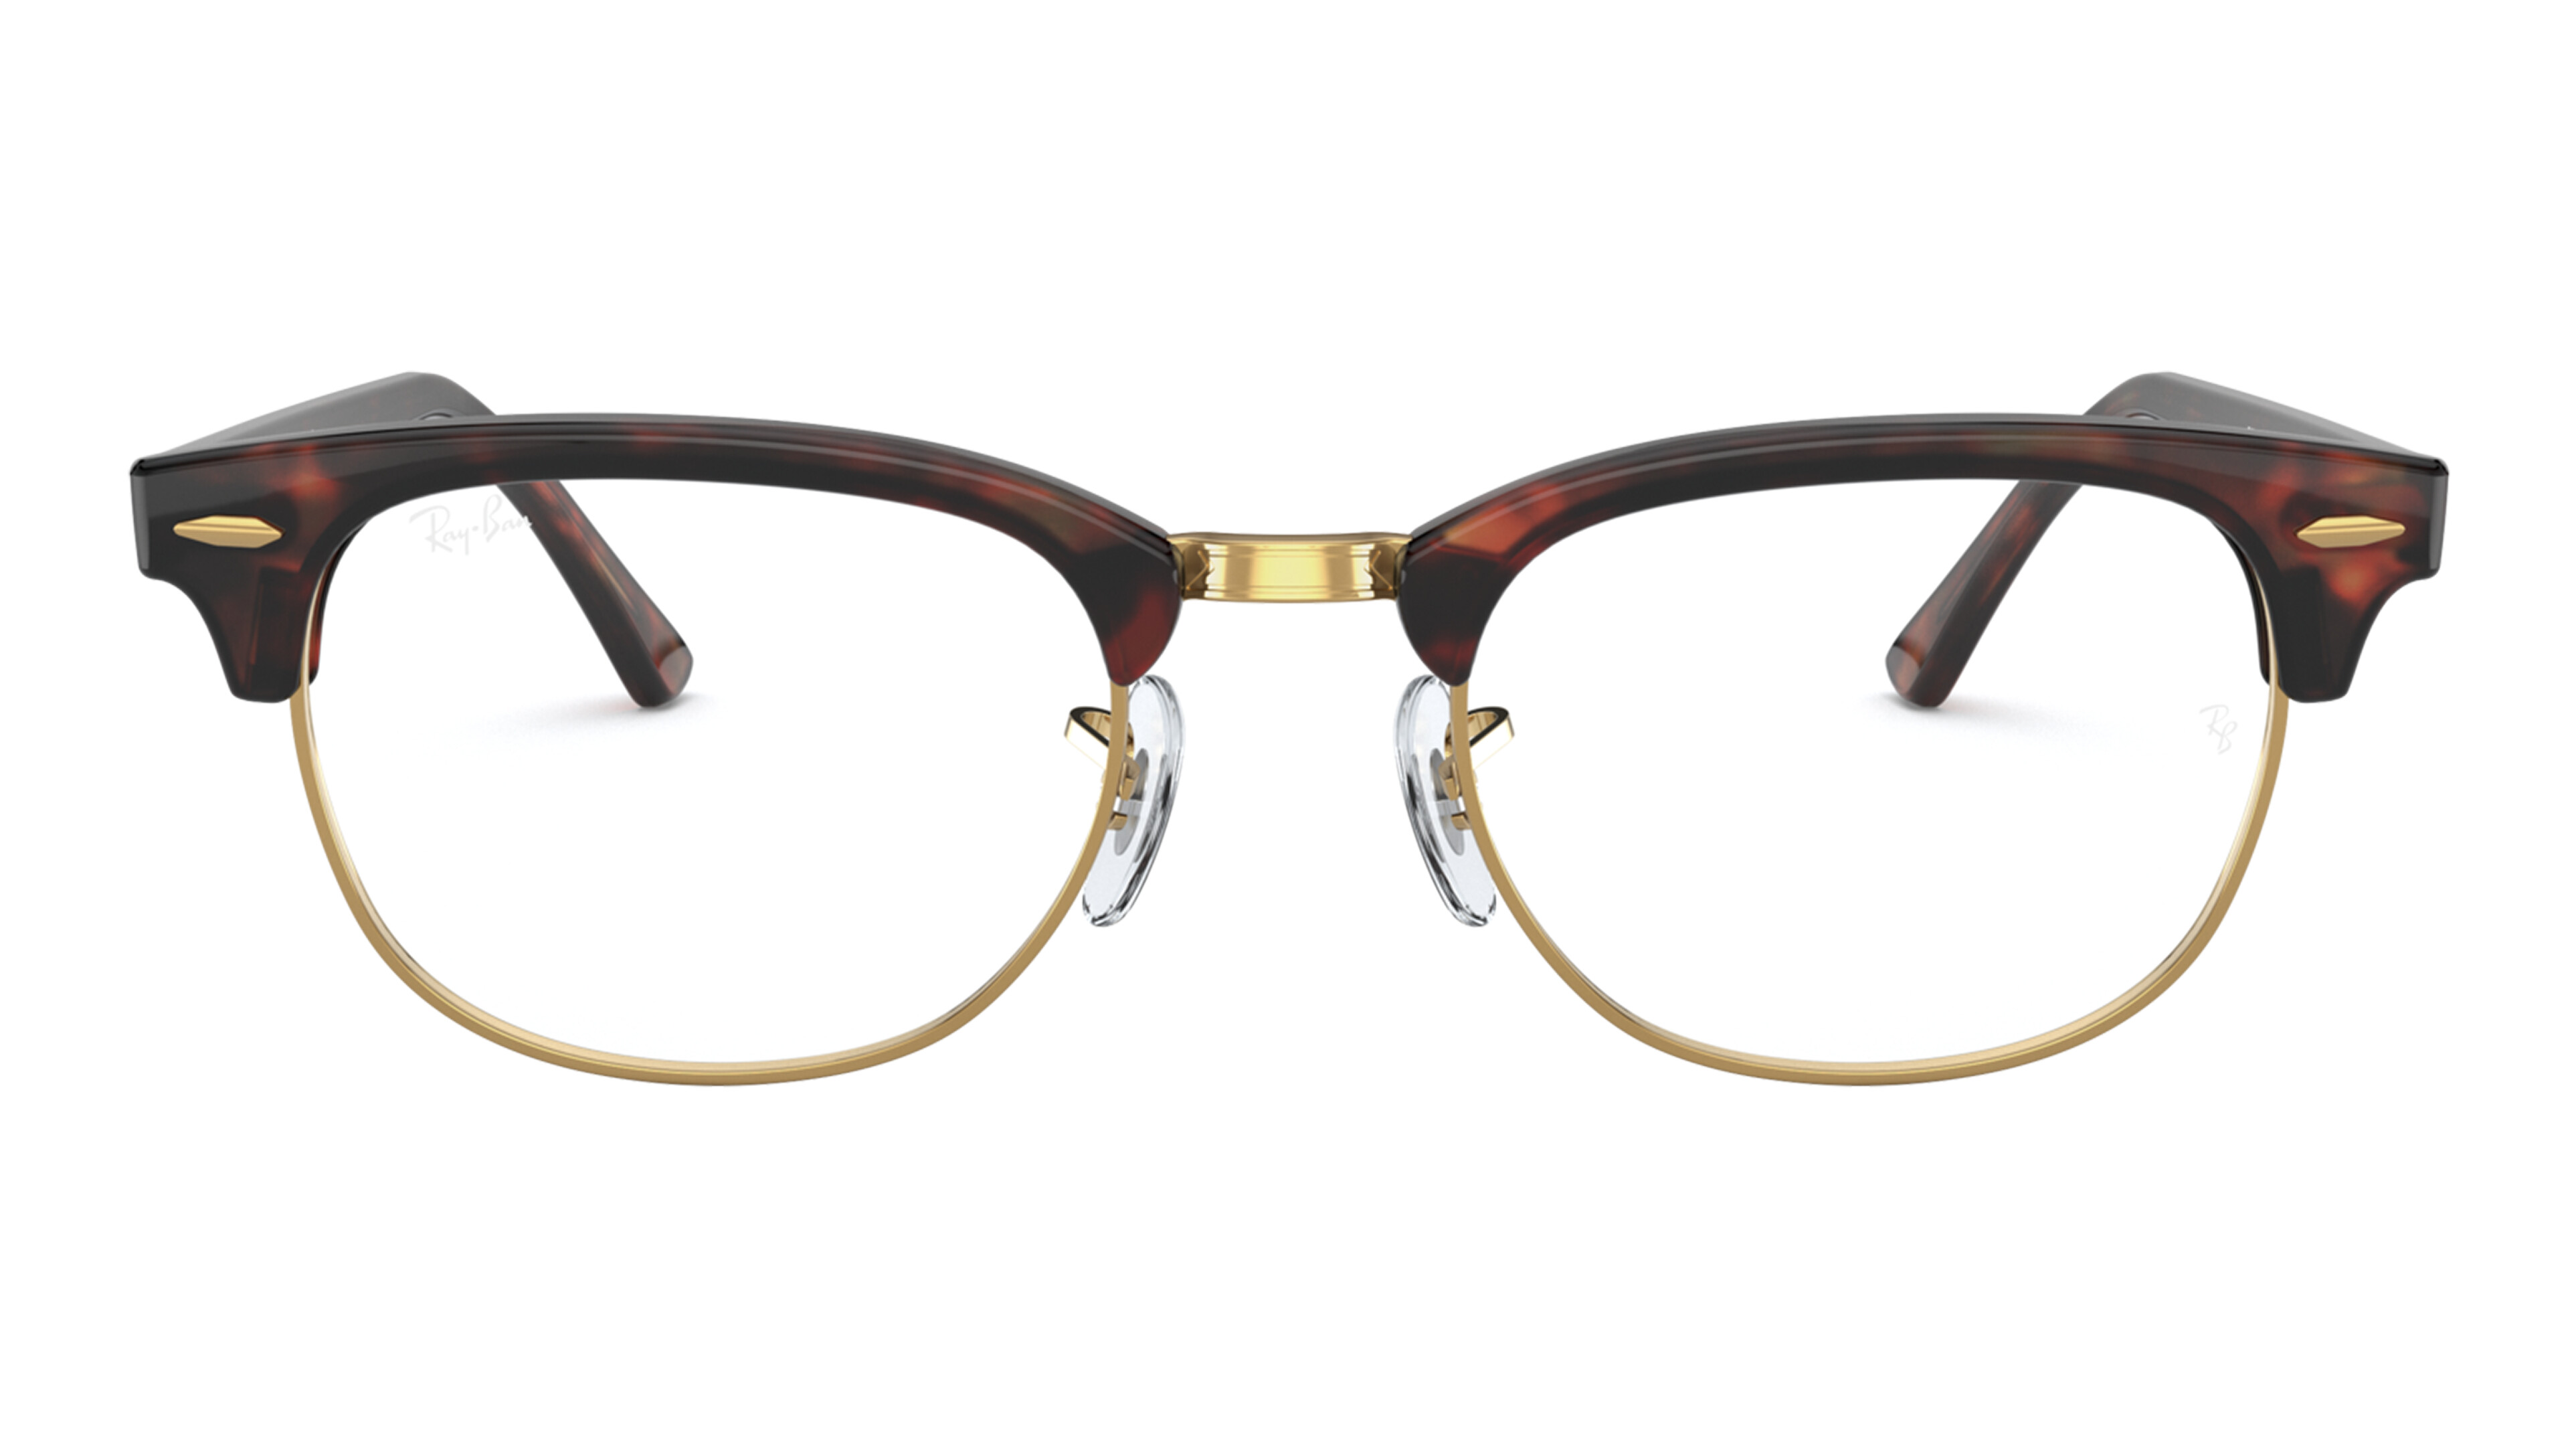 Front Ray-Ban CLUBMASTER 0RX5154 8058 Brille Havana